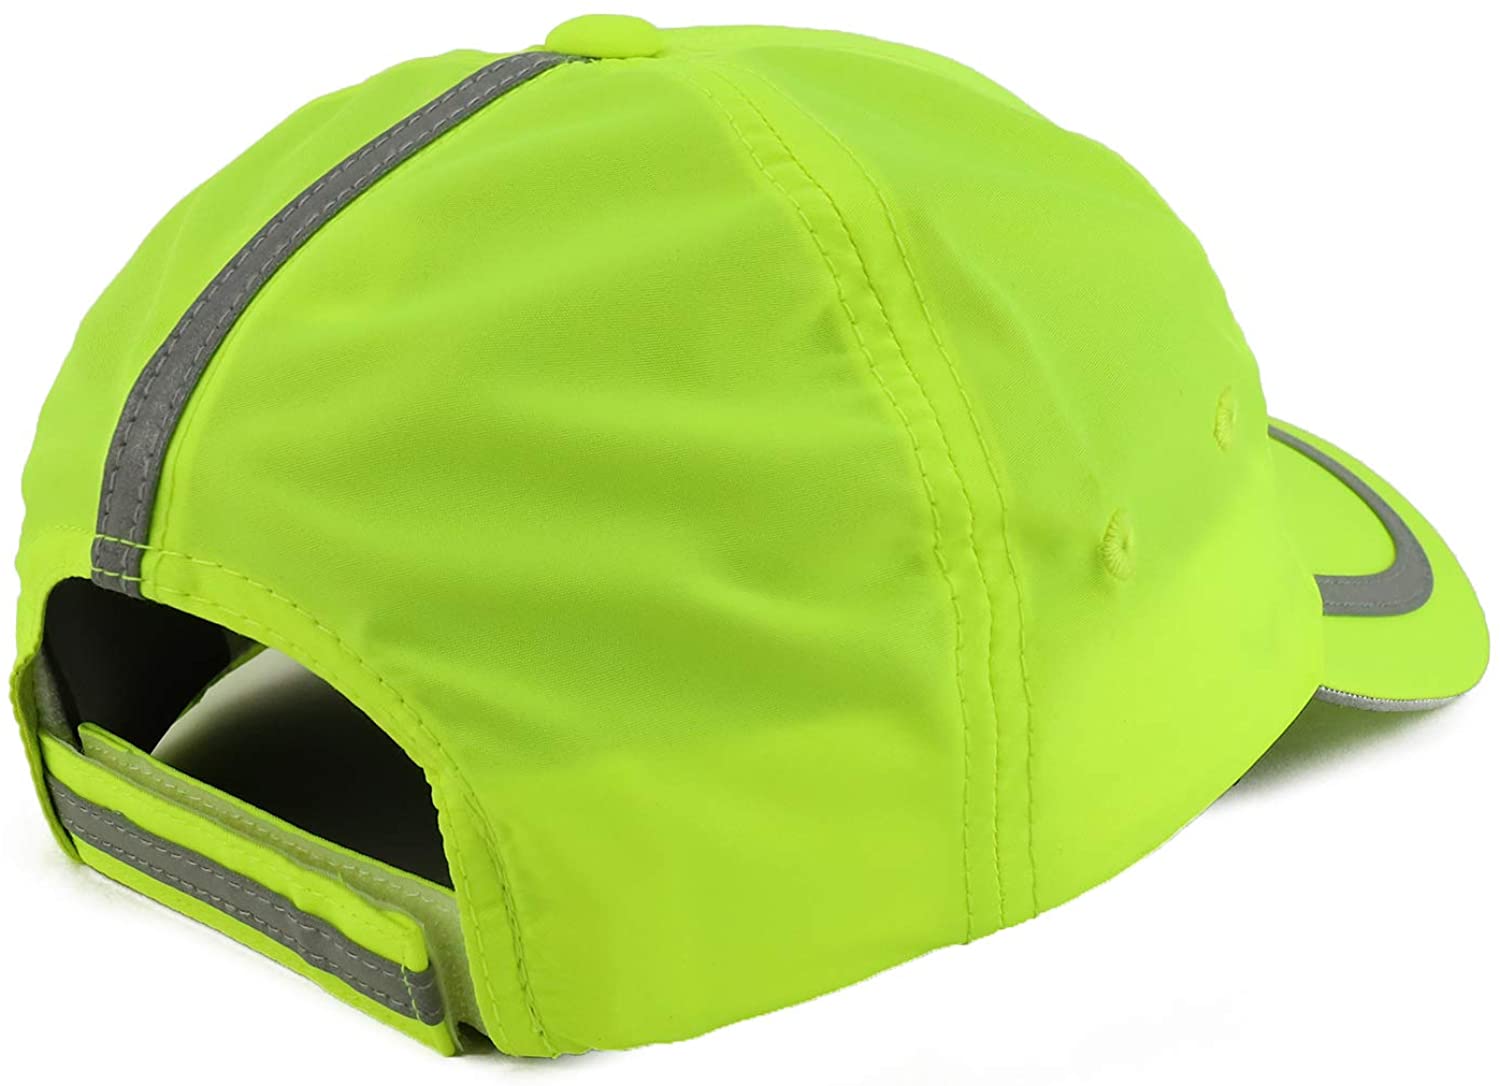 Armycrew Low Profile High Visibility Safety Baseball Cap with Reflective Taping - Yellow